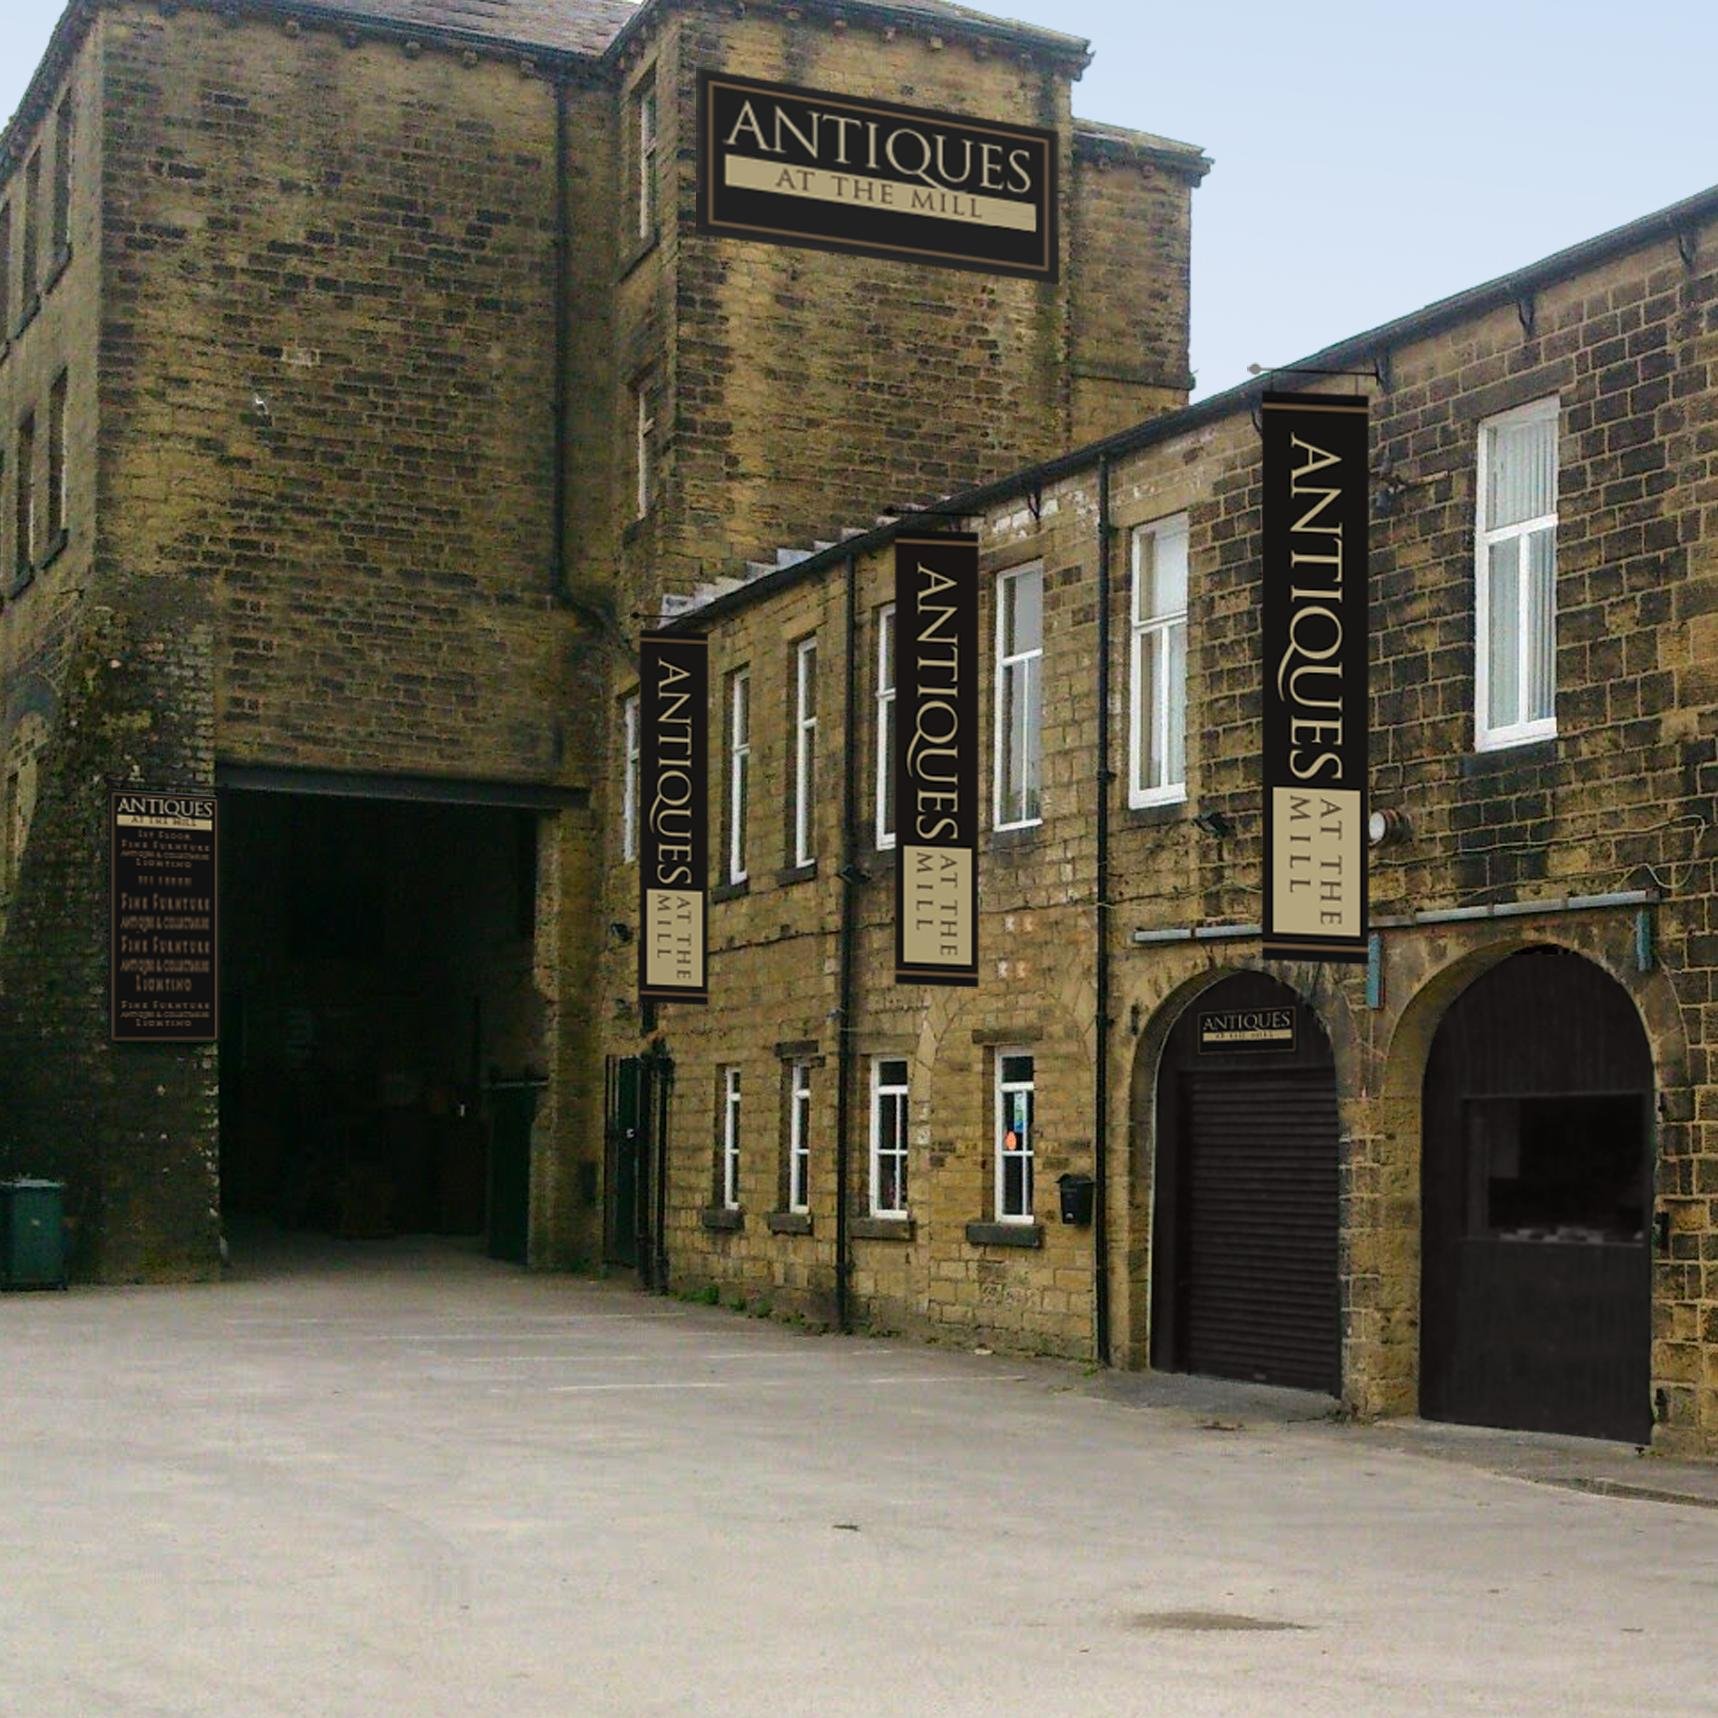 An exciting, large, new Antiques Centre in the heart of Bronte Country, housing a variety of antiques & collectibles with many different traders.